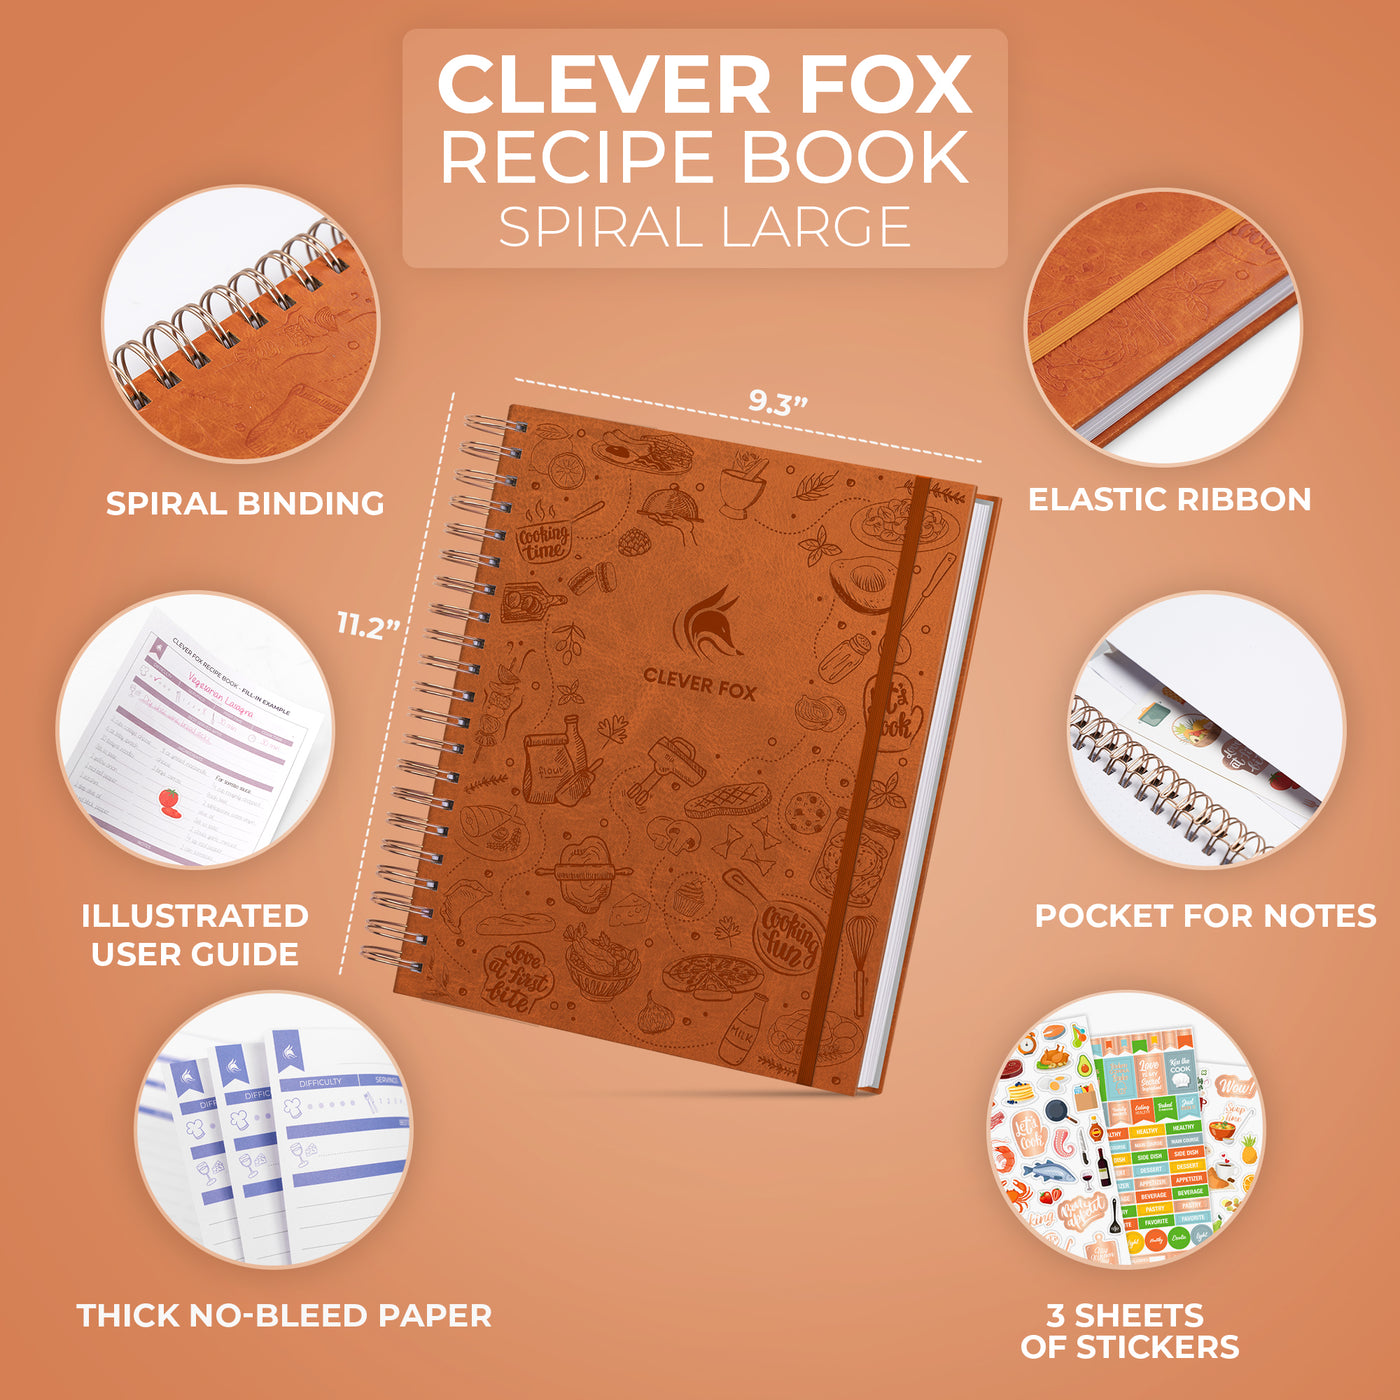 Clever Fox Recipe Book - Make Your Own Family Cookbook & Blank Recipe Notebook Organizer, Empty Cooking Journal to Write in Recipes, A5 Hardcover